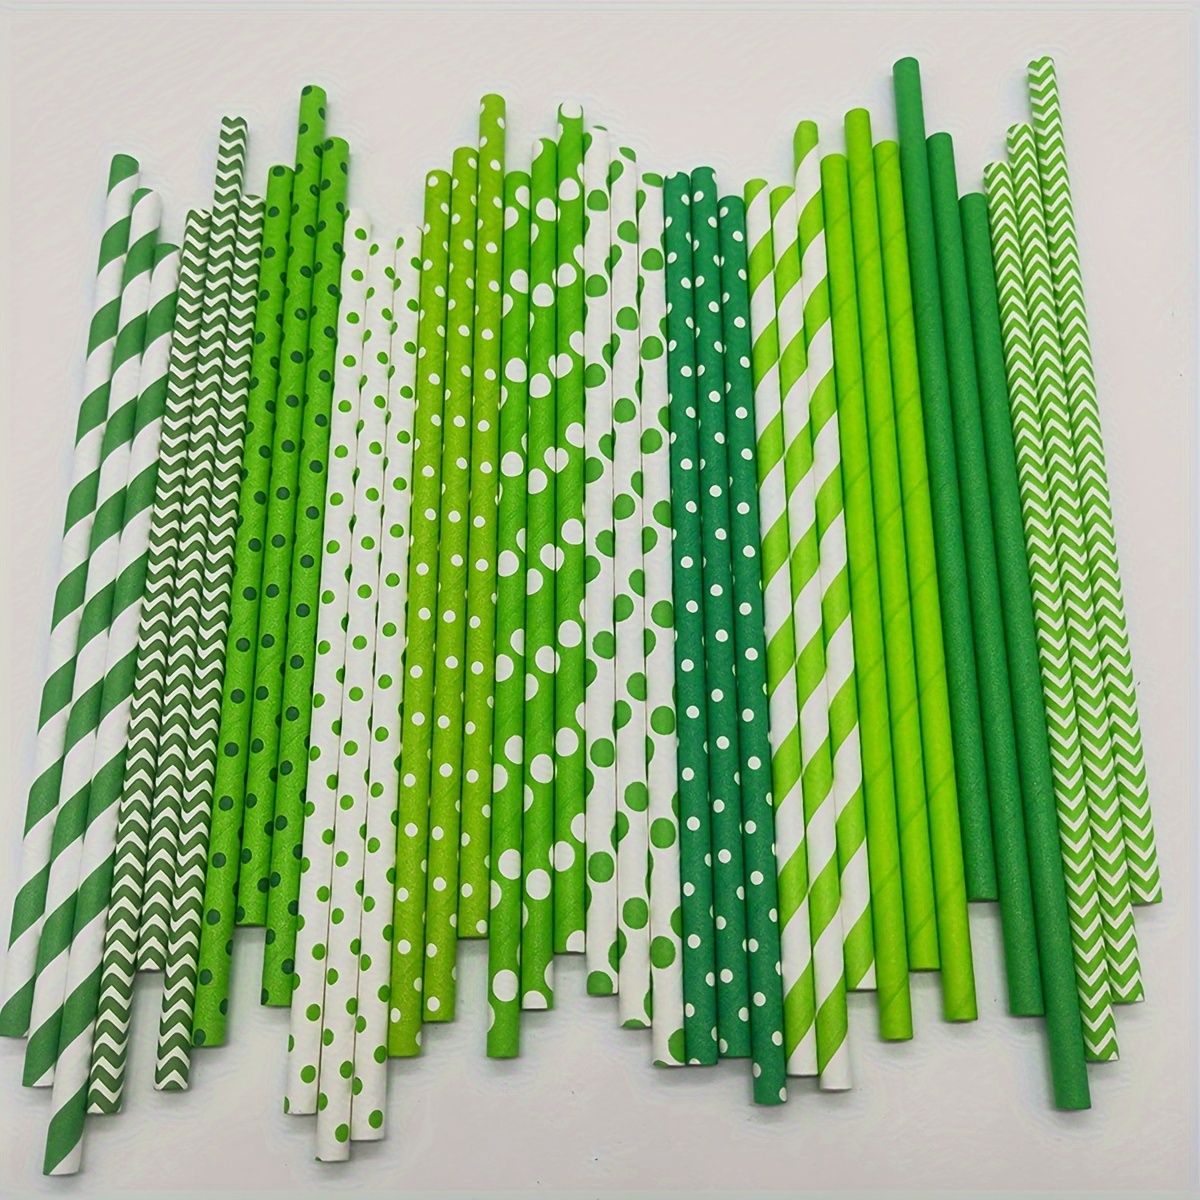 

25pcs, Disposable Straws Made Of Biodegradable Paper For Decorating Cakes And Desserts, Party Decor, Party Supplies, Holiday Decor, Holiday Supplies